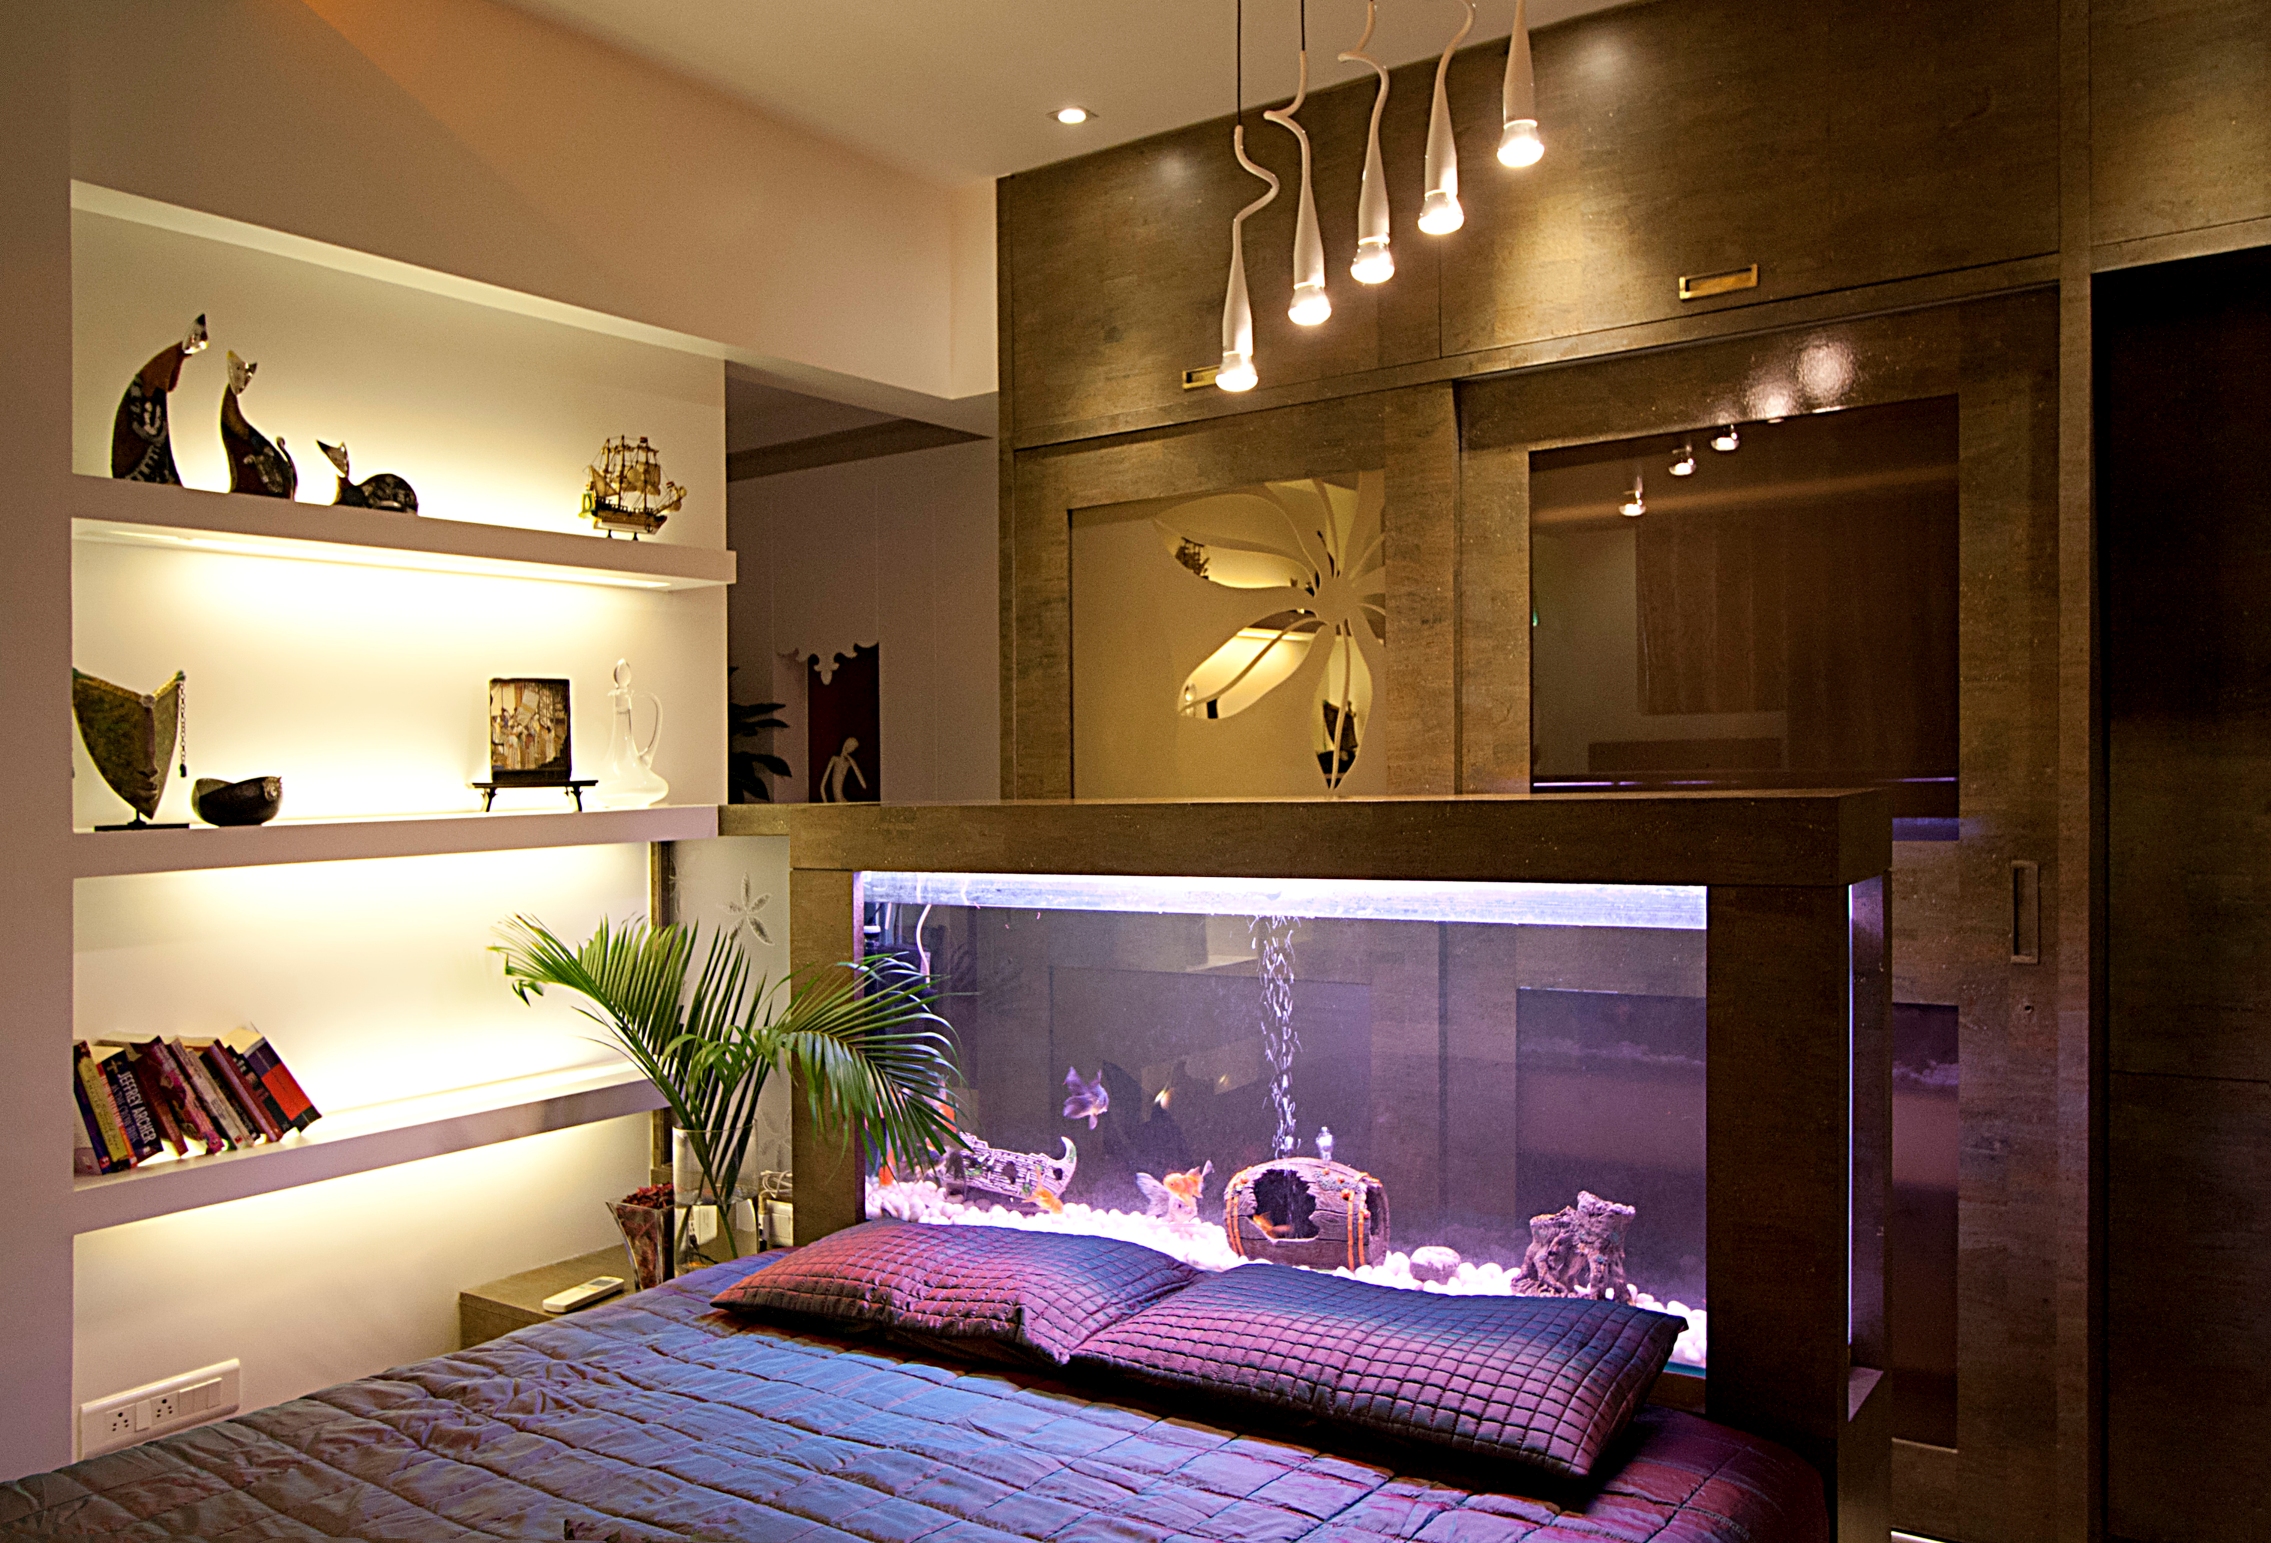 Design of a Beautiful Bed Room by Architecture design art pvt ltd